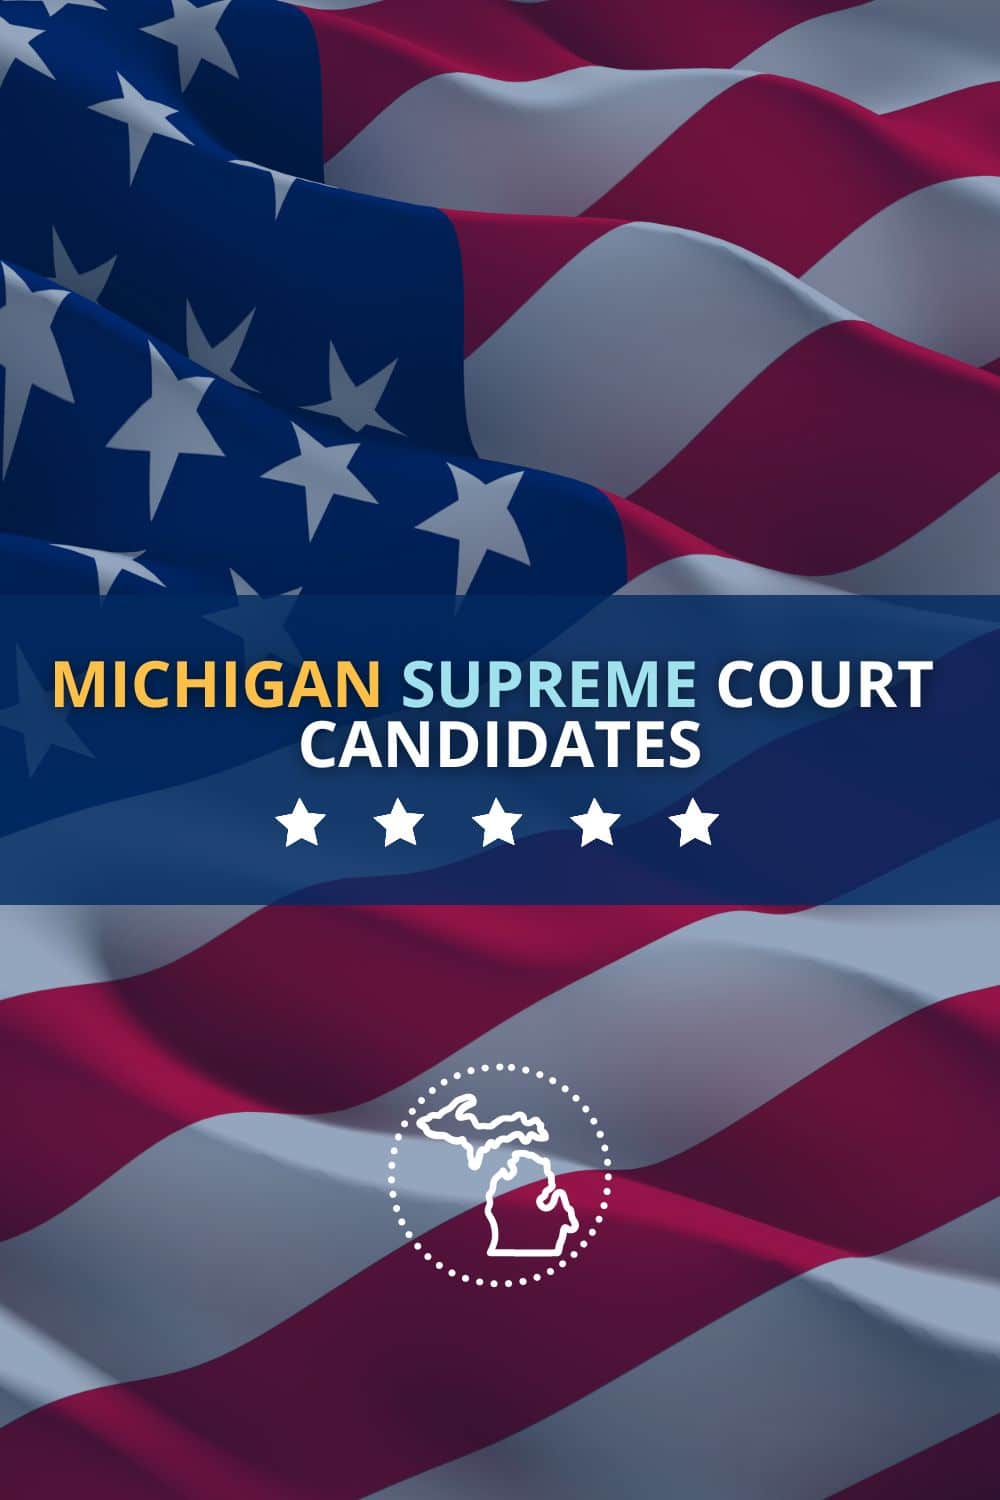 Michigan Supreme Court Candidates 2022: Who Should You Vote For?